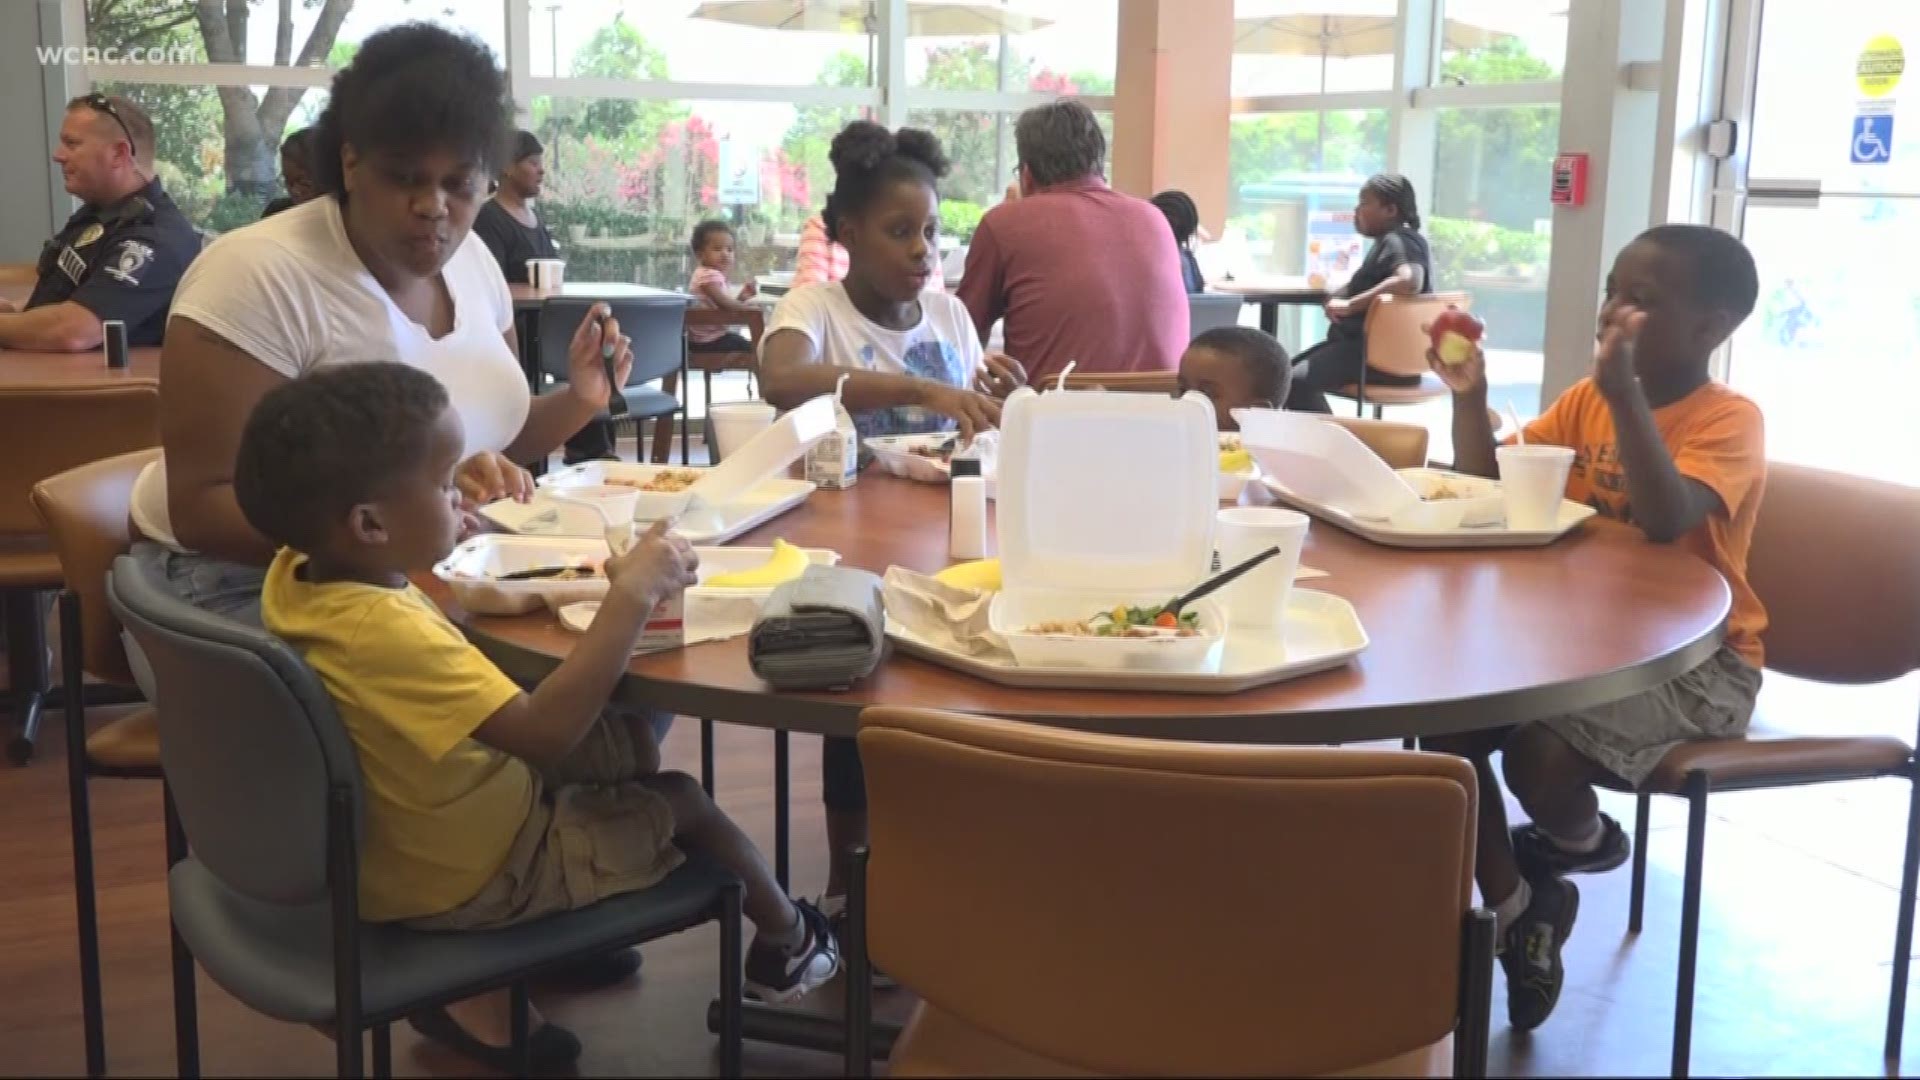 The Atrium Health location in University is offering meals to kids who otherwise might go without during the Summer.